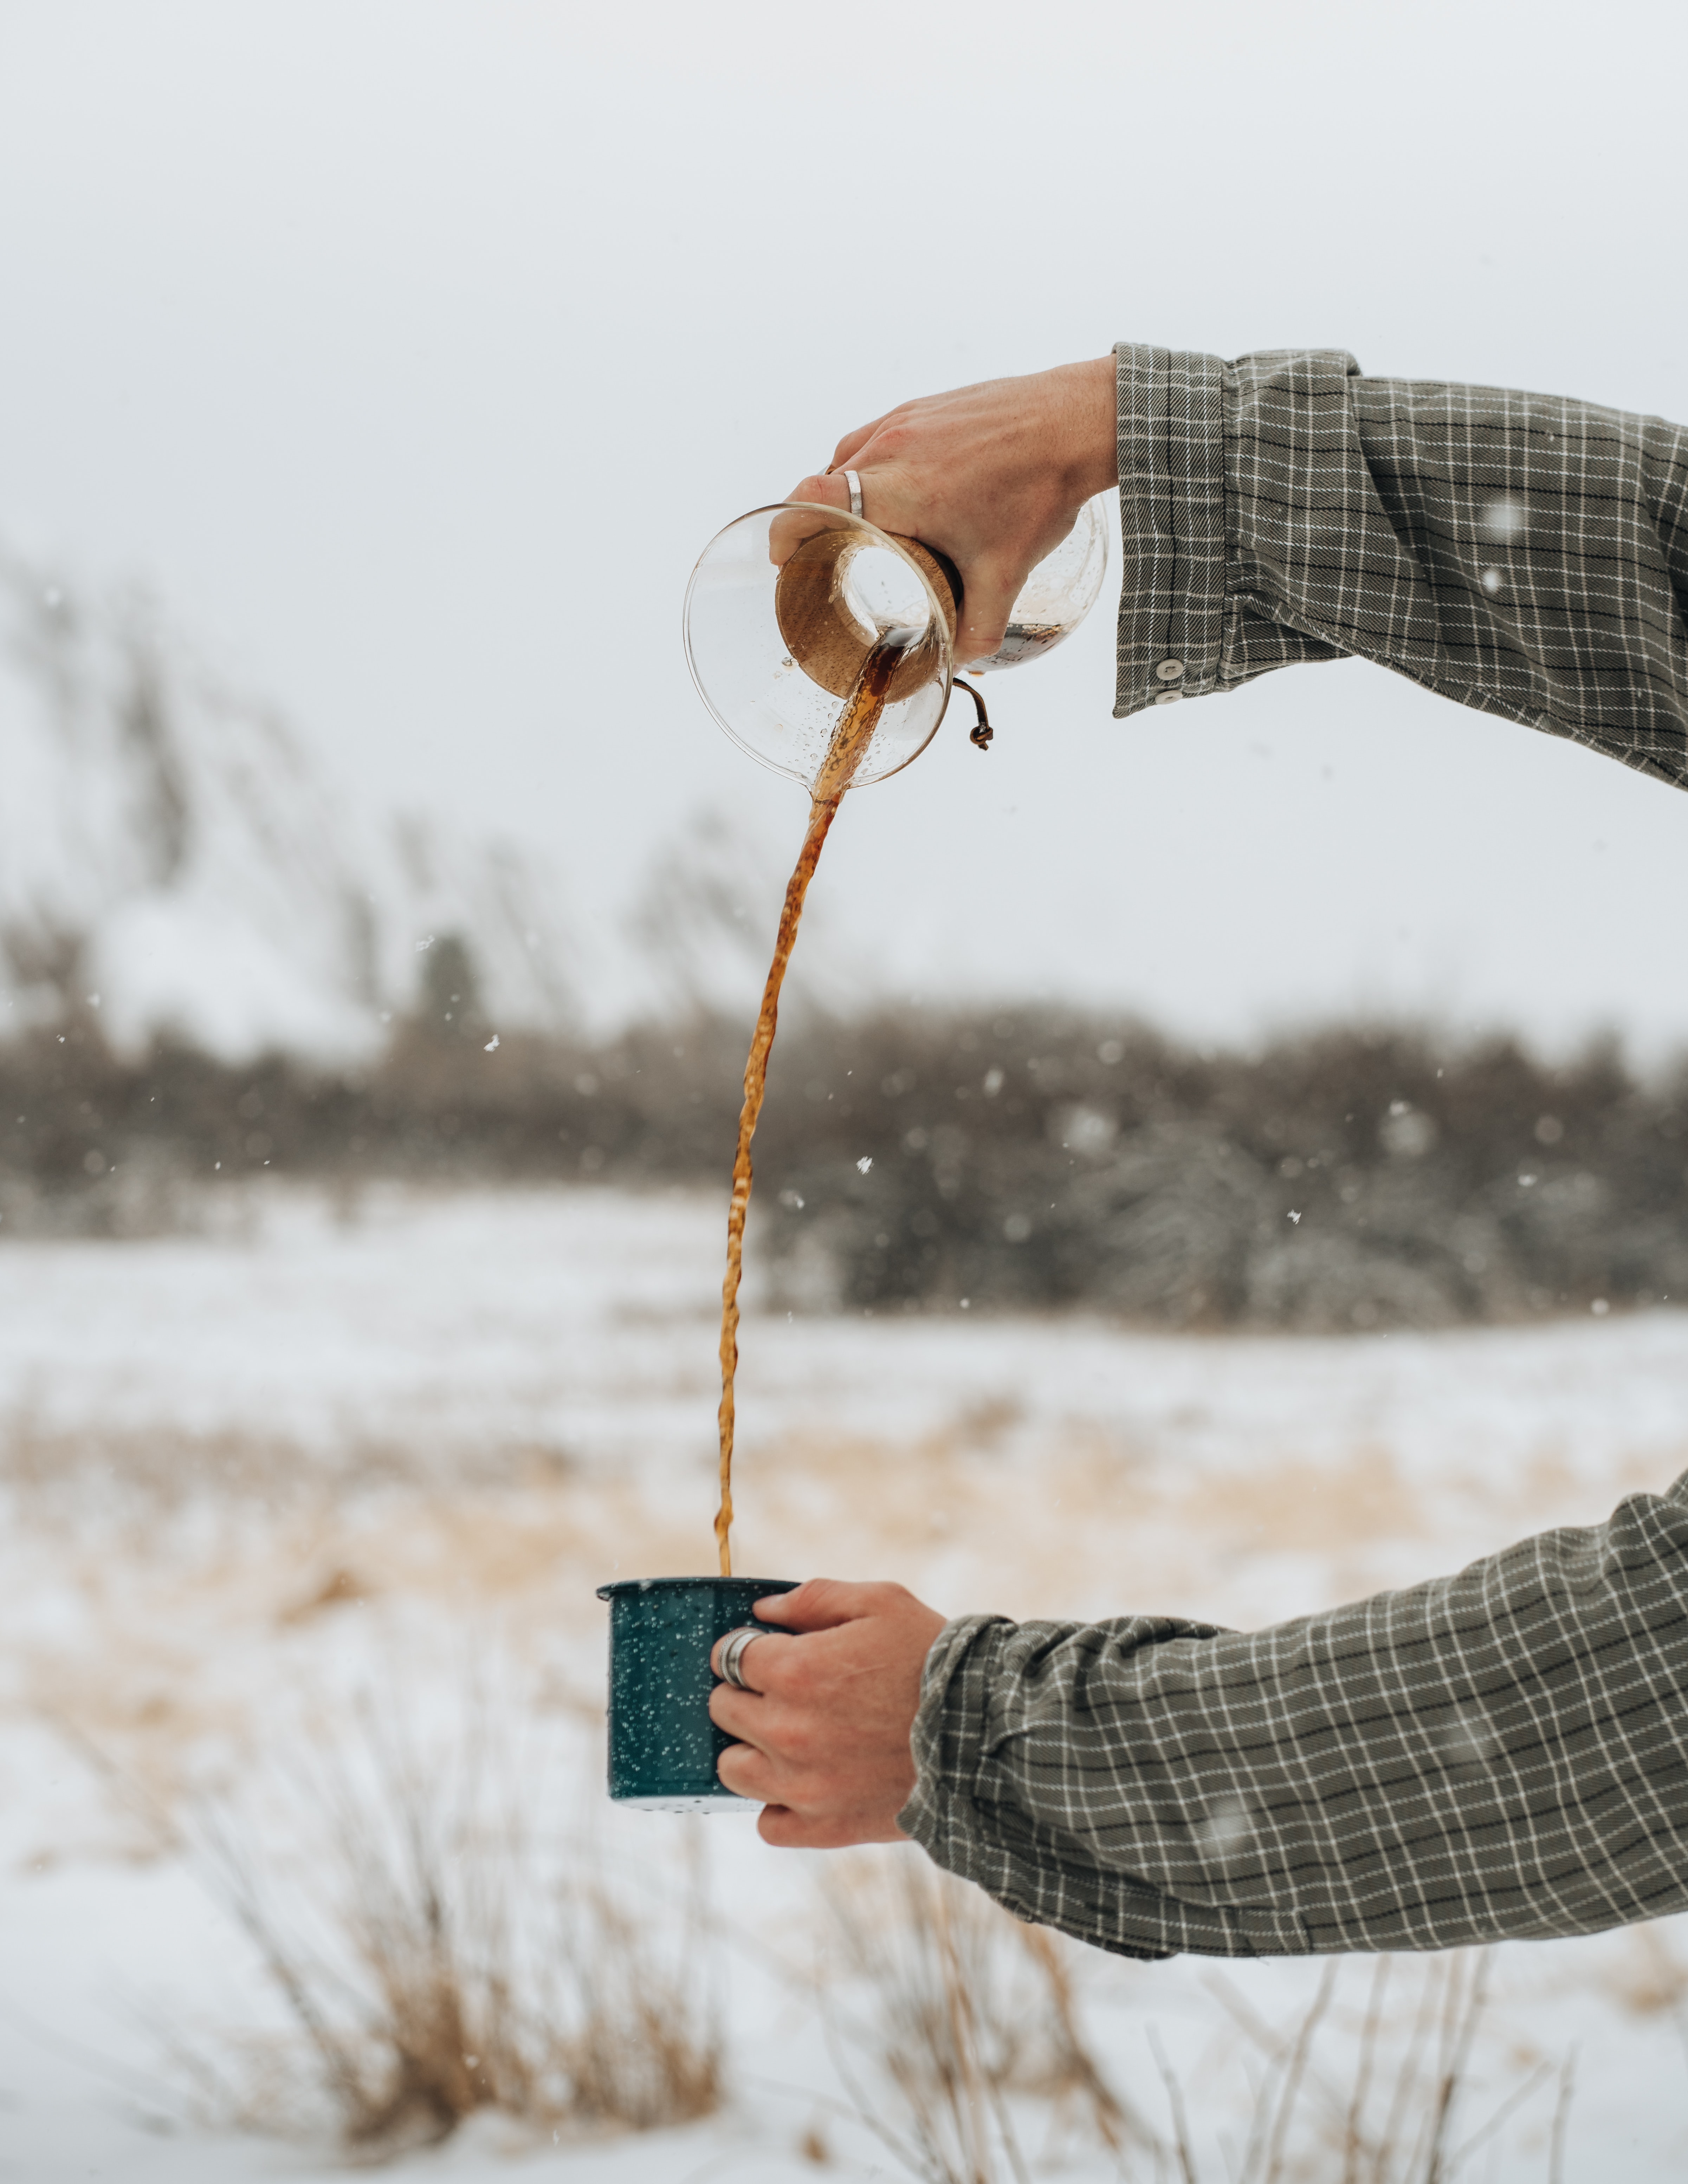 android winter, snow, coffee, miscellanea, miscellaneous, cup, hands, mug